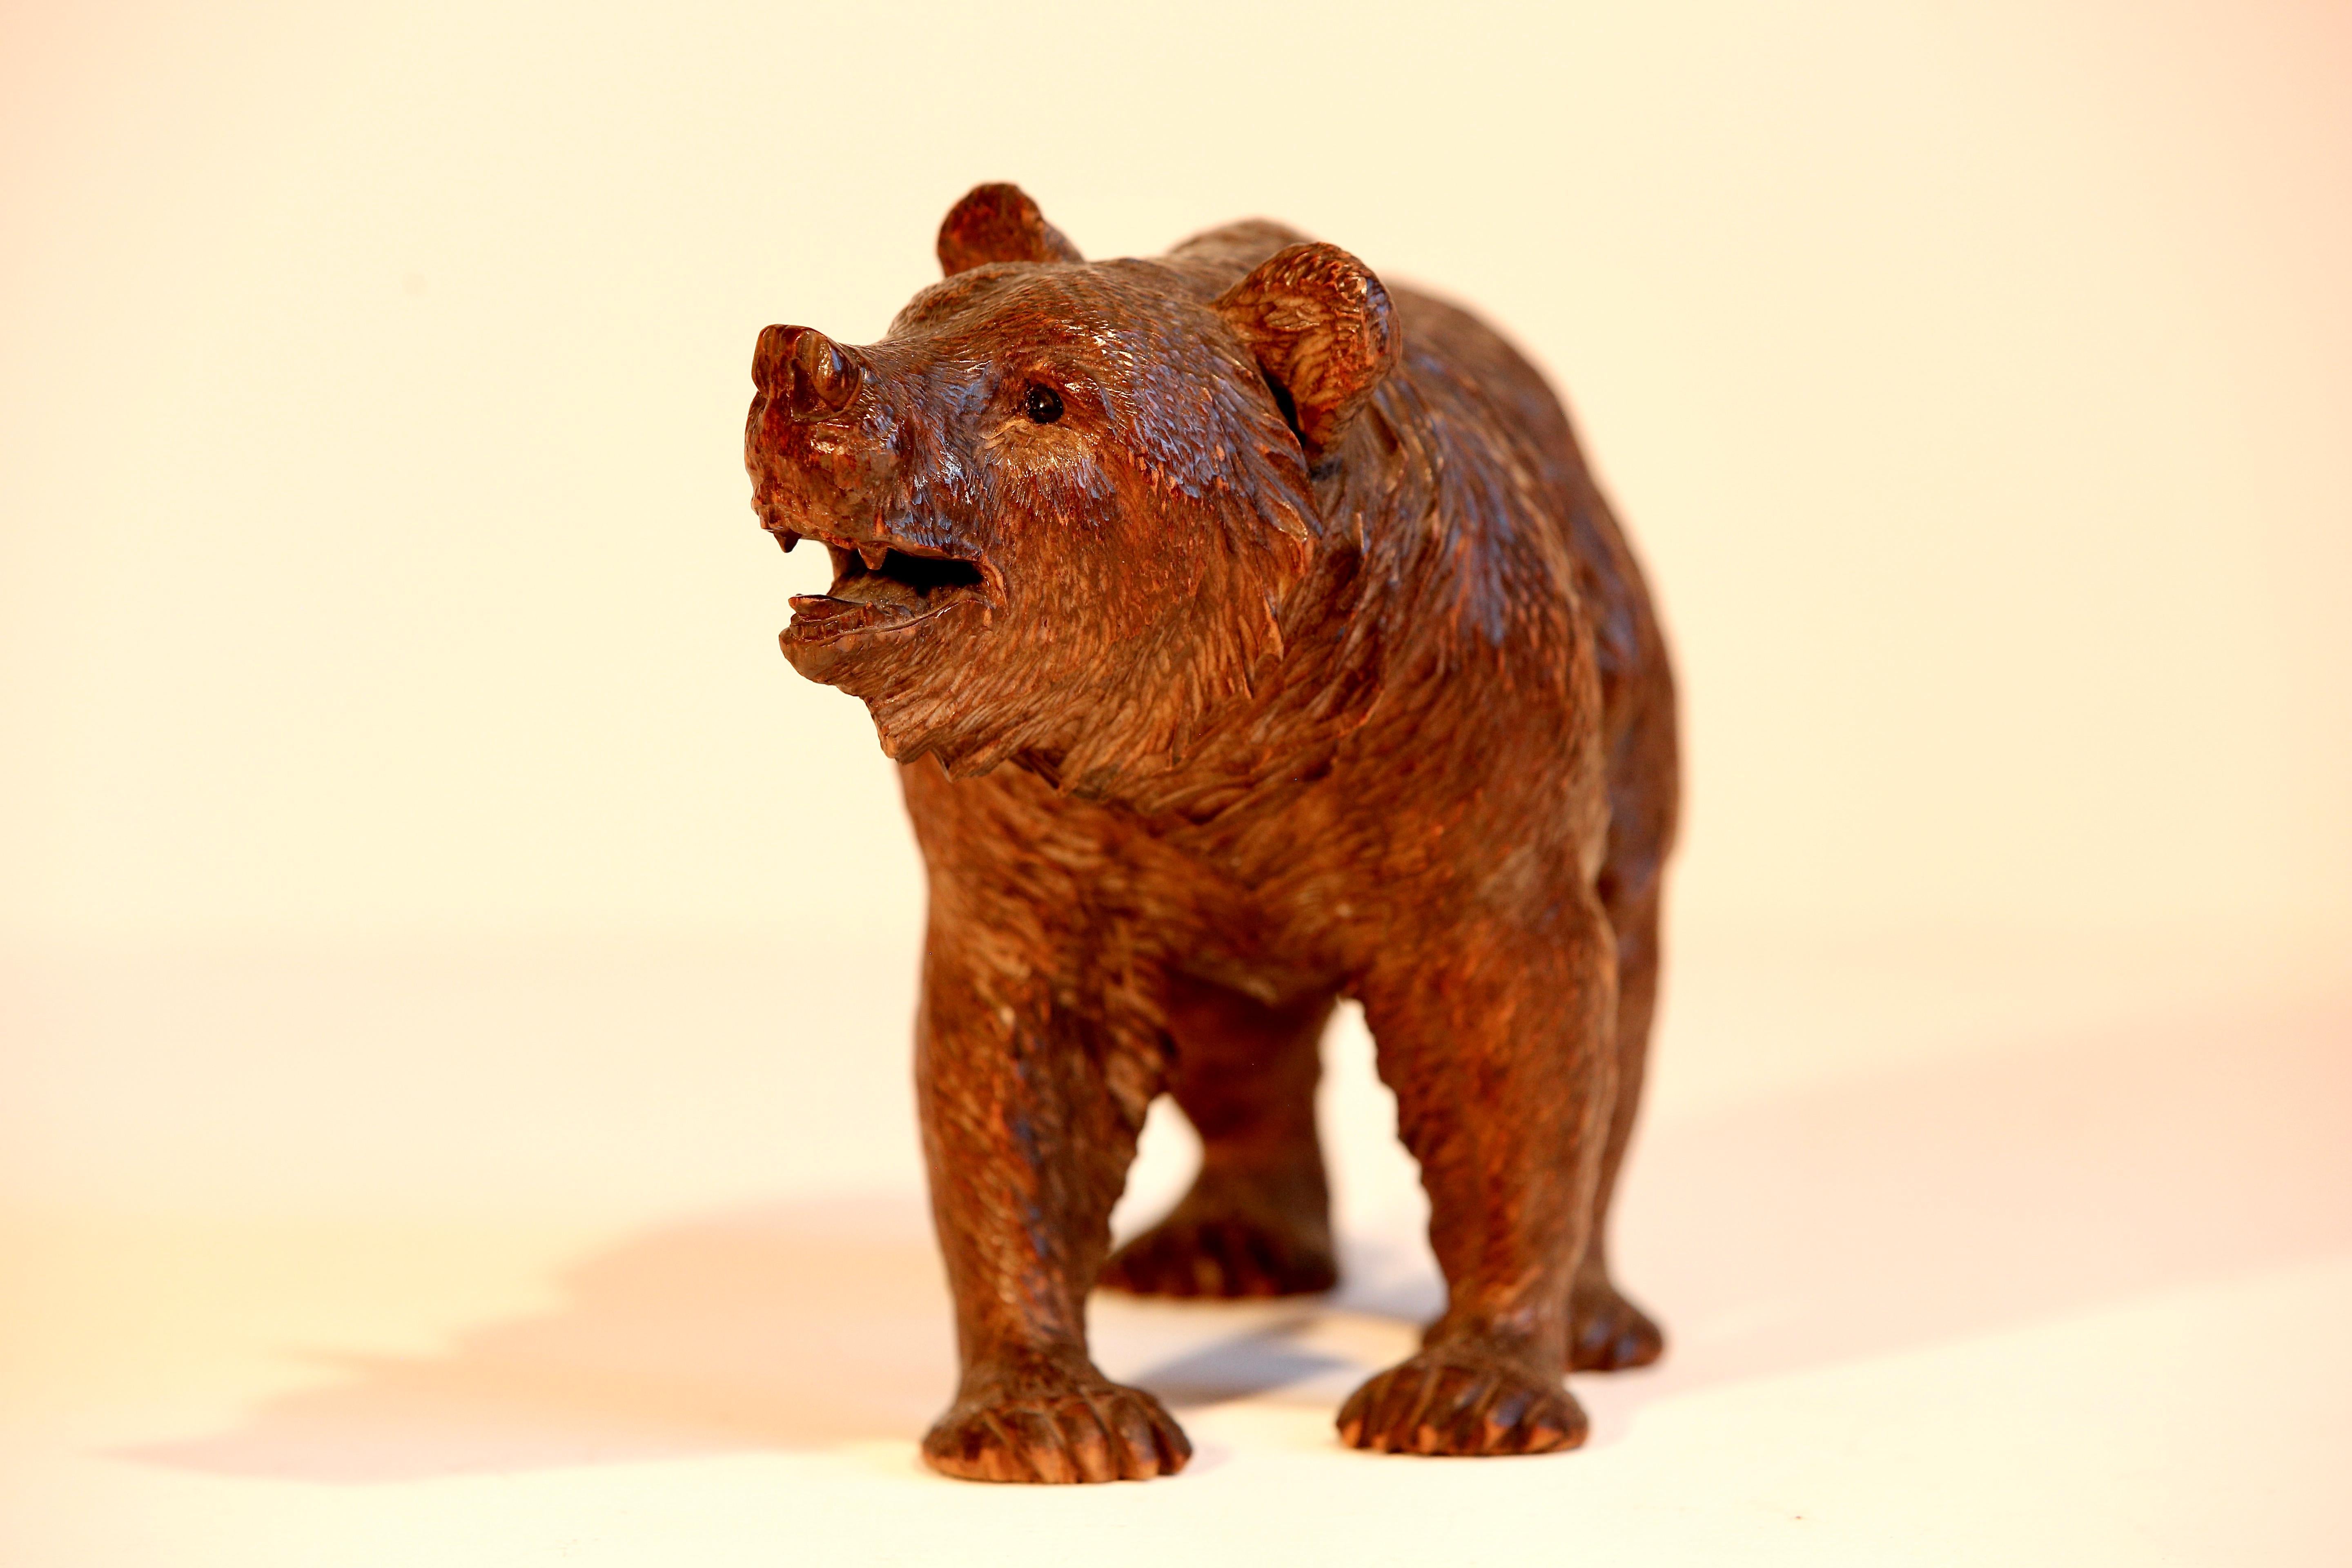   
Black Forest Linden wood naturalistically carved strolling bear with original glass eyes, crafted in Brienz. This exquisitely carved lindenwood piece features realistic details. An excellent illustration of the well-known Swiss Black Forest